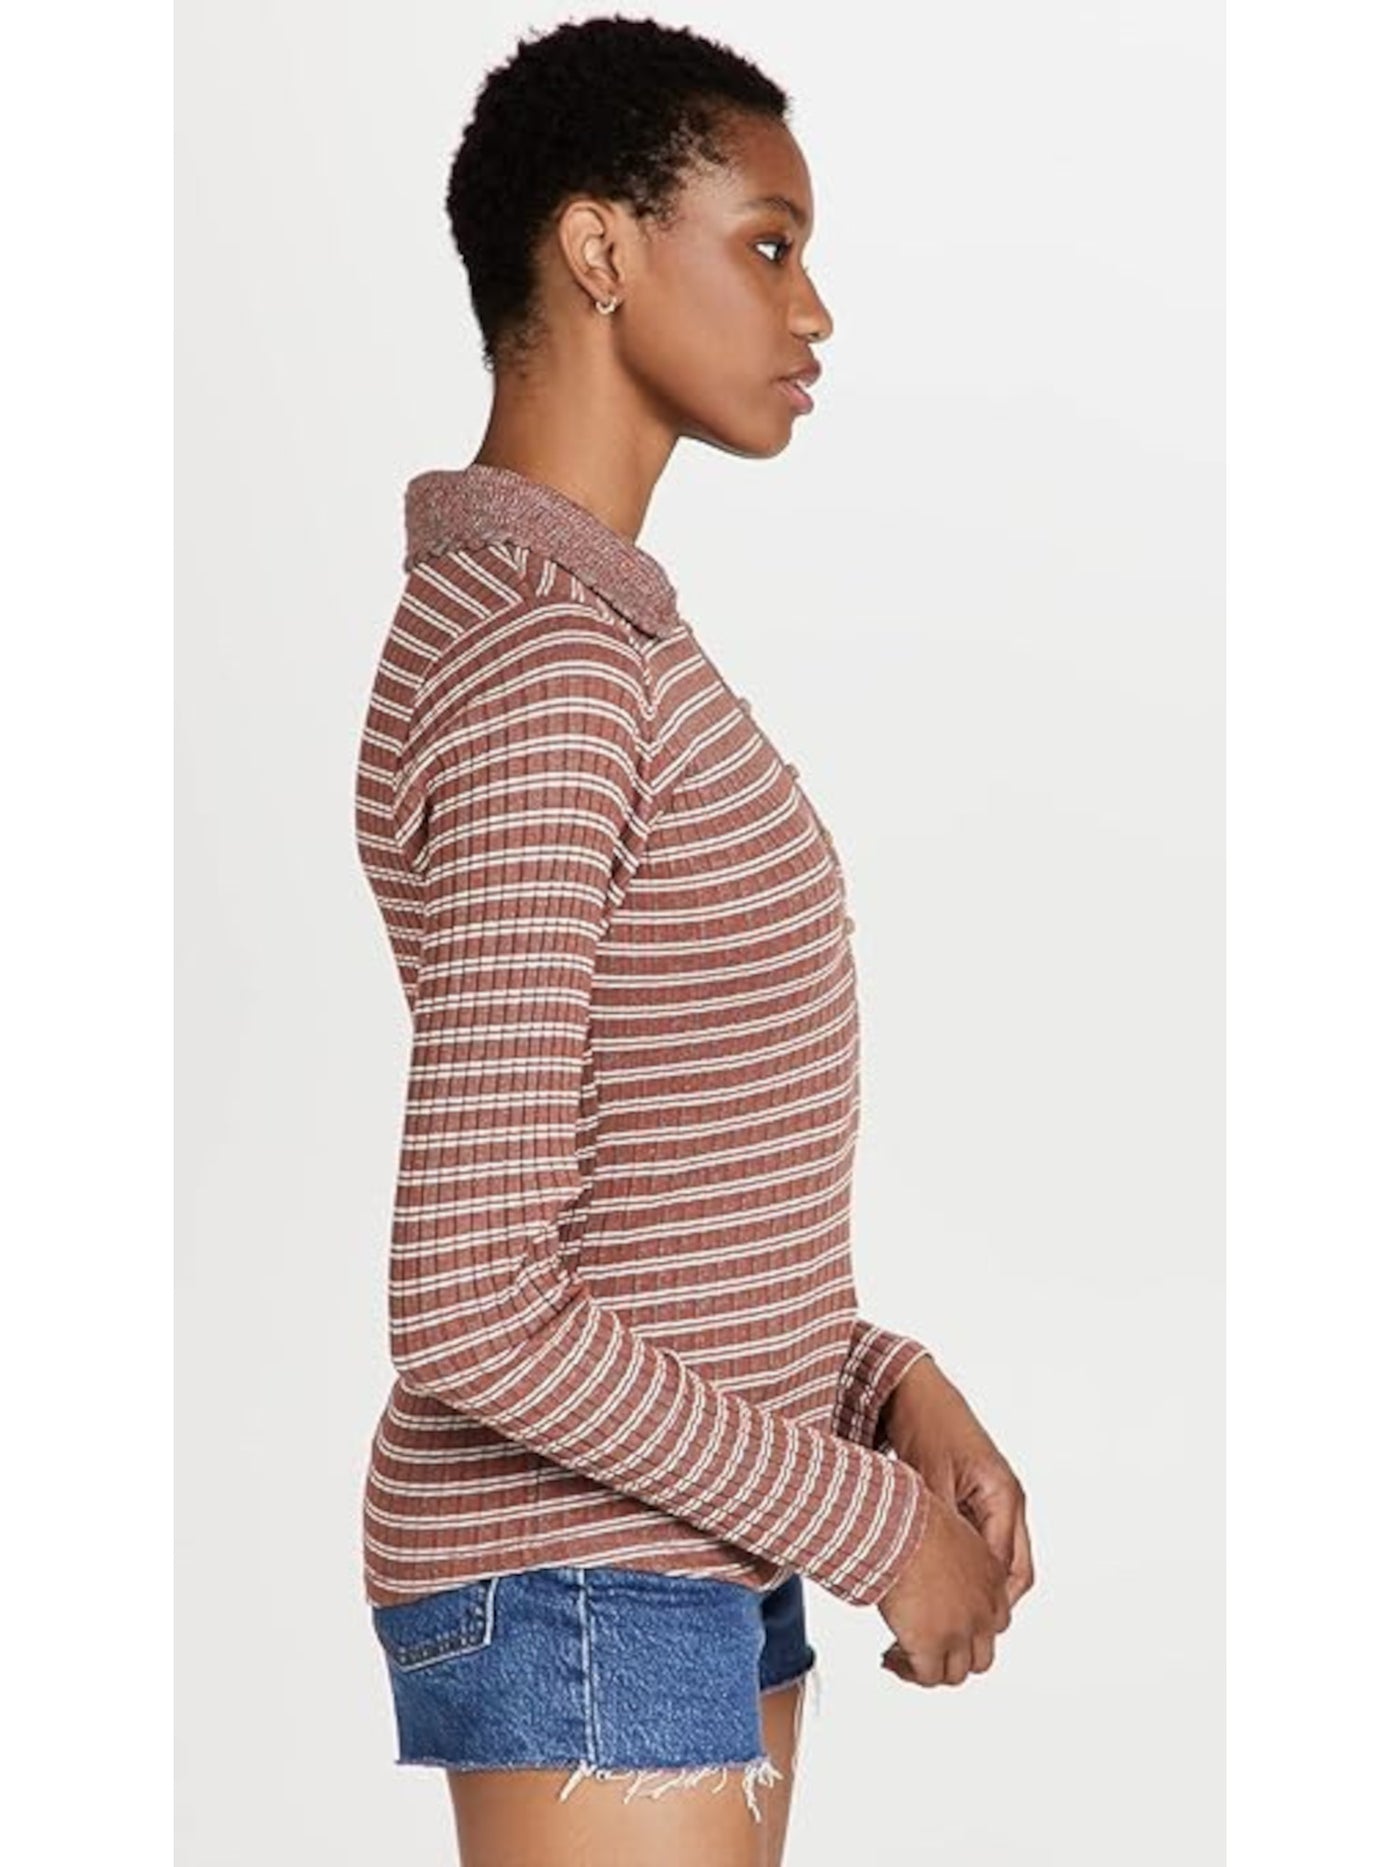 FREE PEOPLE Womens Brown Ribbed Crochet Trim Button Half Placket Striped Long Sleeve Collared Top Juniors XS